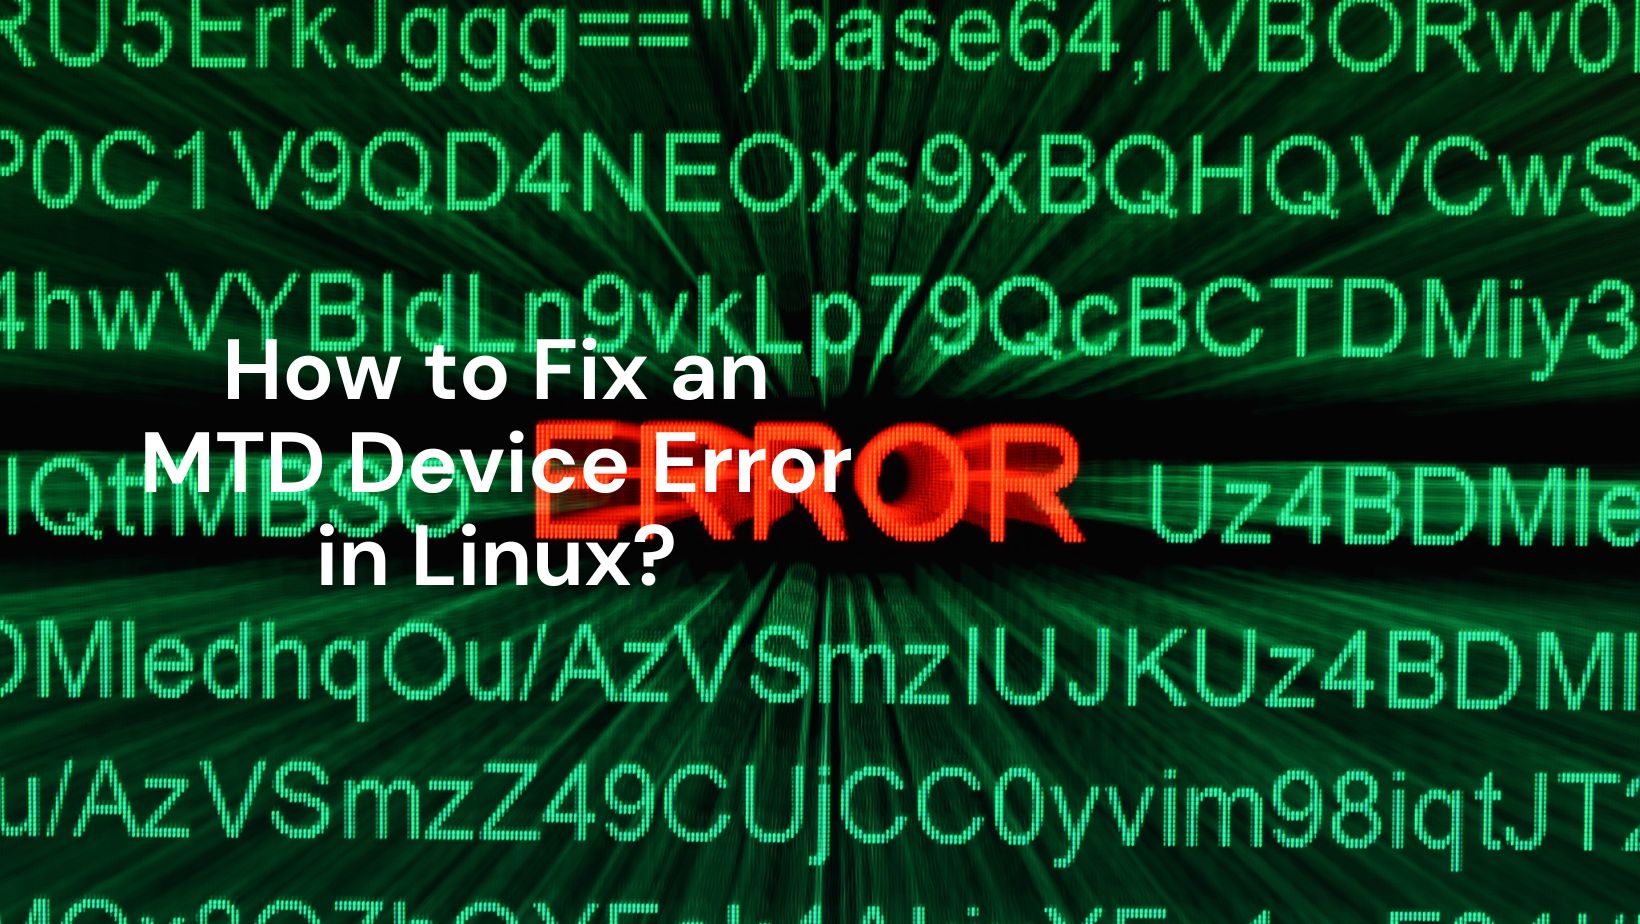 How to Fix an MTD Device Error in Linux?